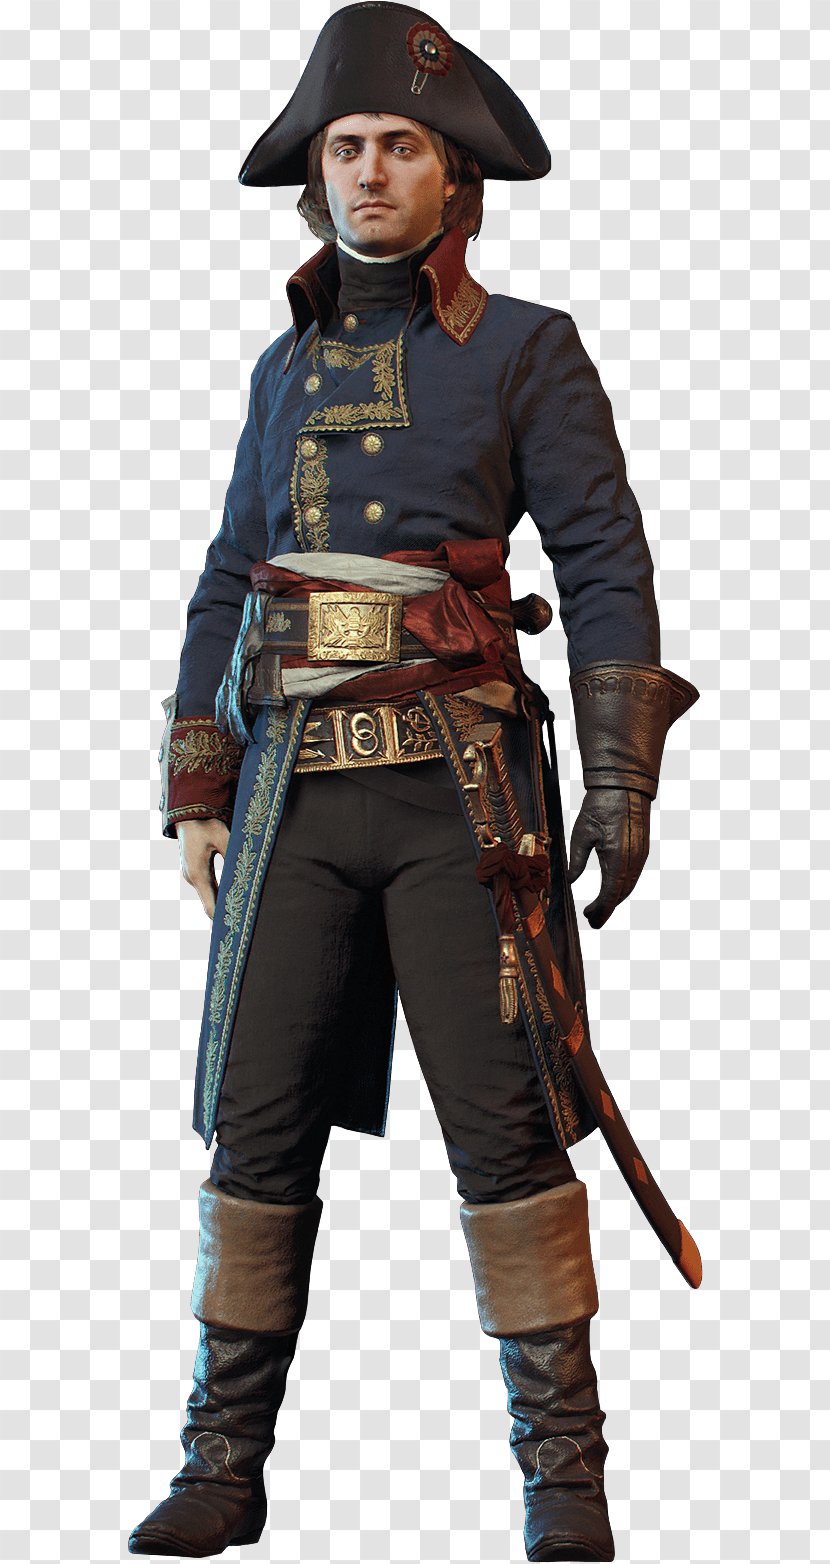 Napoleonic Wars Assassin's Creed: Unity - Action Figure - Dead Kings Pirates Creed IV: Black FlagFrance Transparent PNG